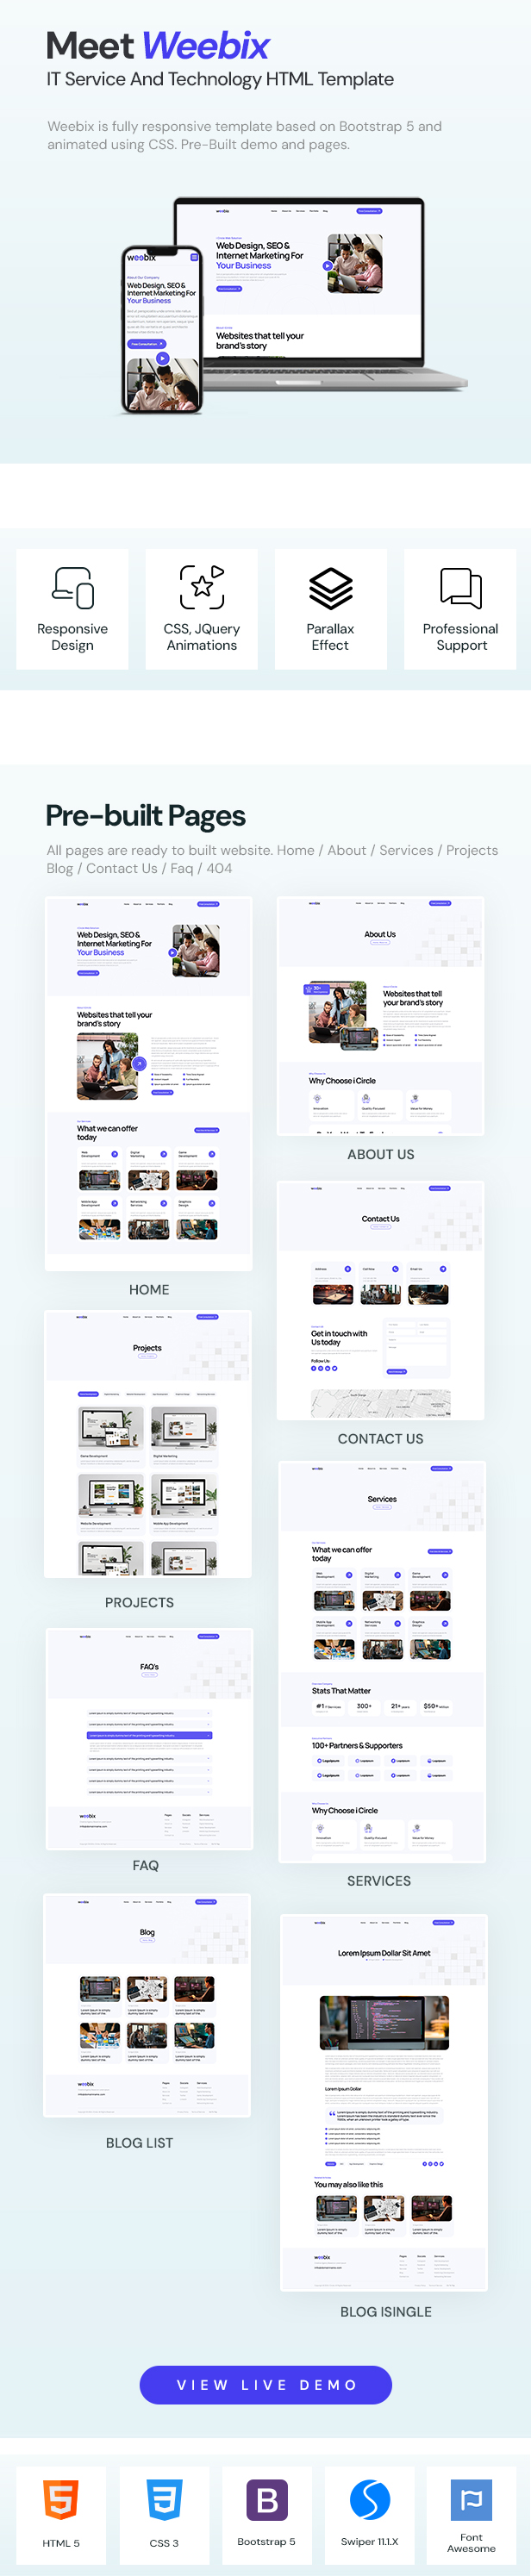 Weebix - IT Service And Technology HTML Template - 2